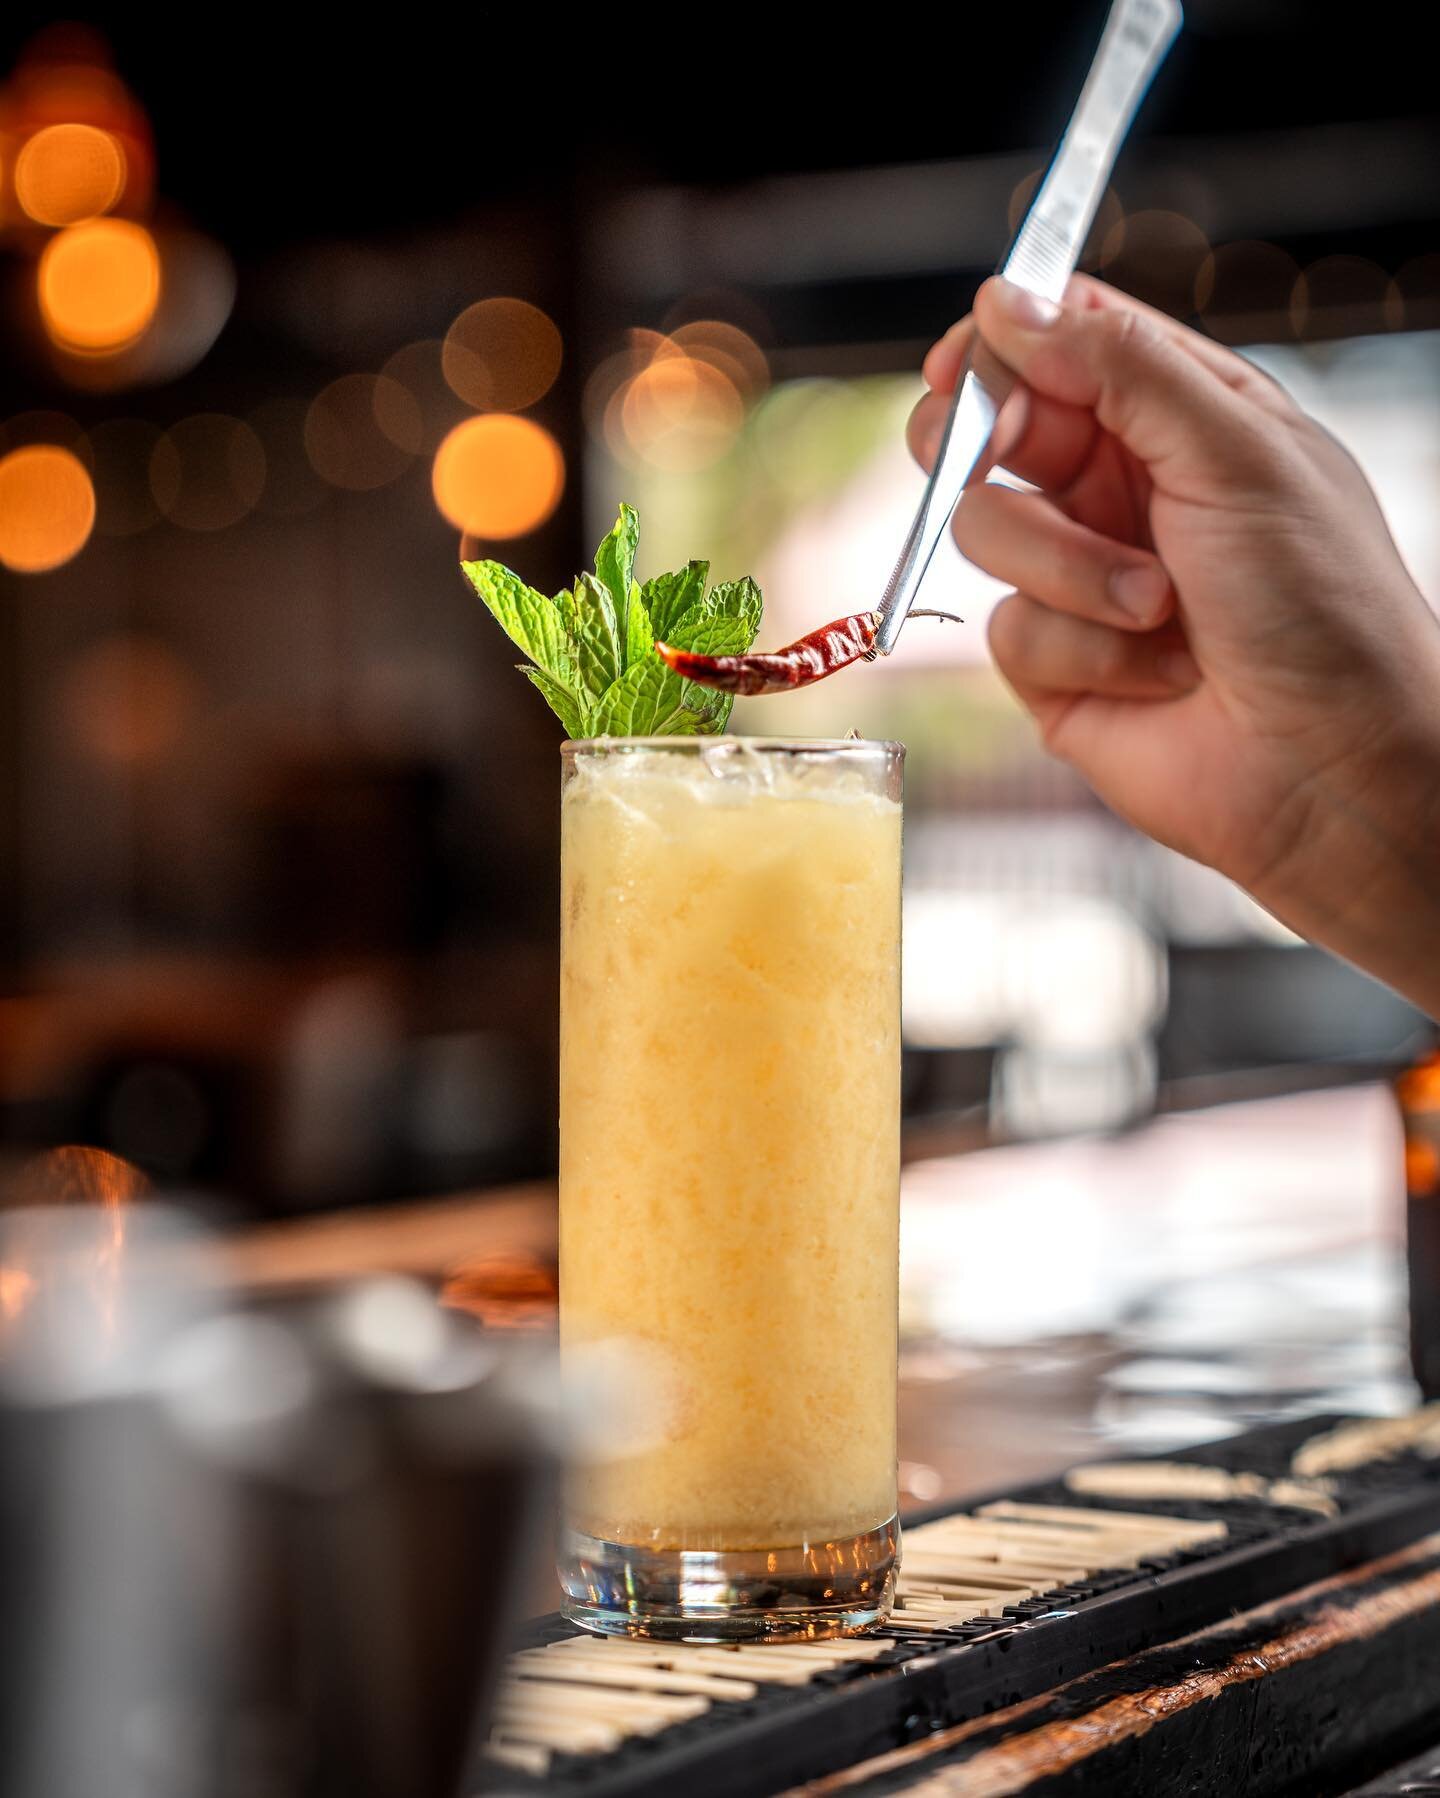 The Atlas Hands is the perfect cocktail for the summertime! The house-made Cococnut Curry Syrup combines with refreshing flavors, making a perfectly savory and warming cocktail sure to delight. Stop by tonight to try this great cocktail along with ou